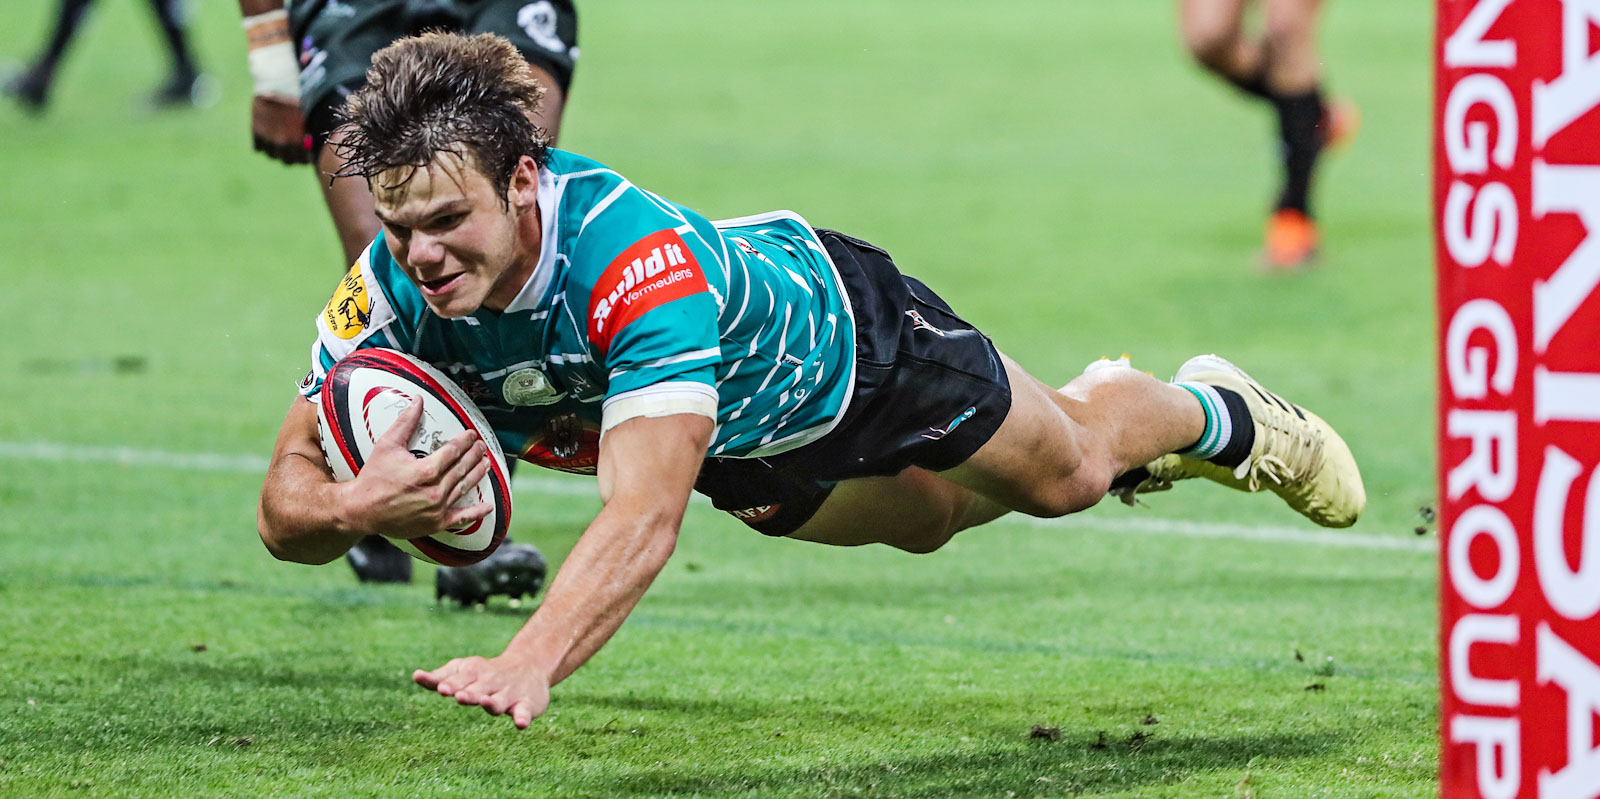 Eduan Keyter scored both Tafel Lager Griquas' tries in Nelspruit. Images by Johan Orton.